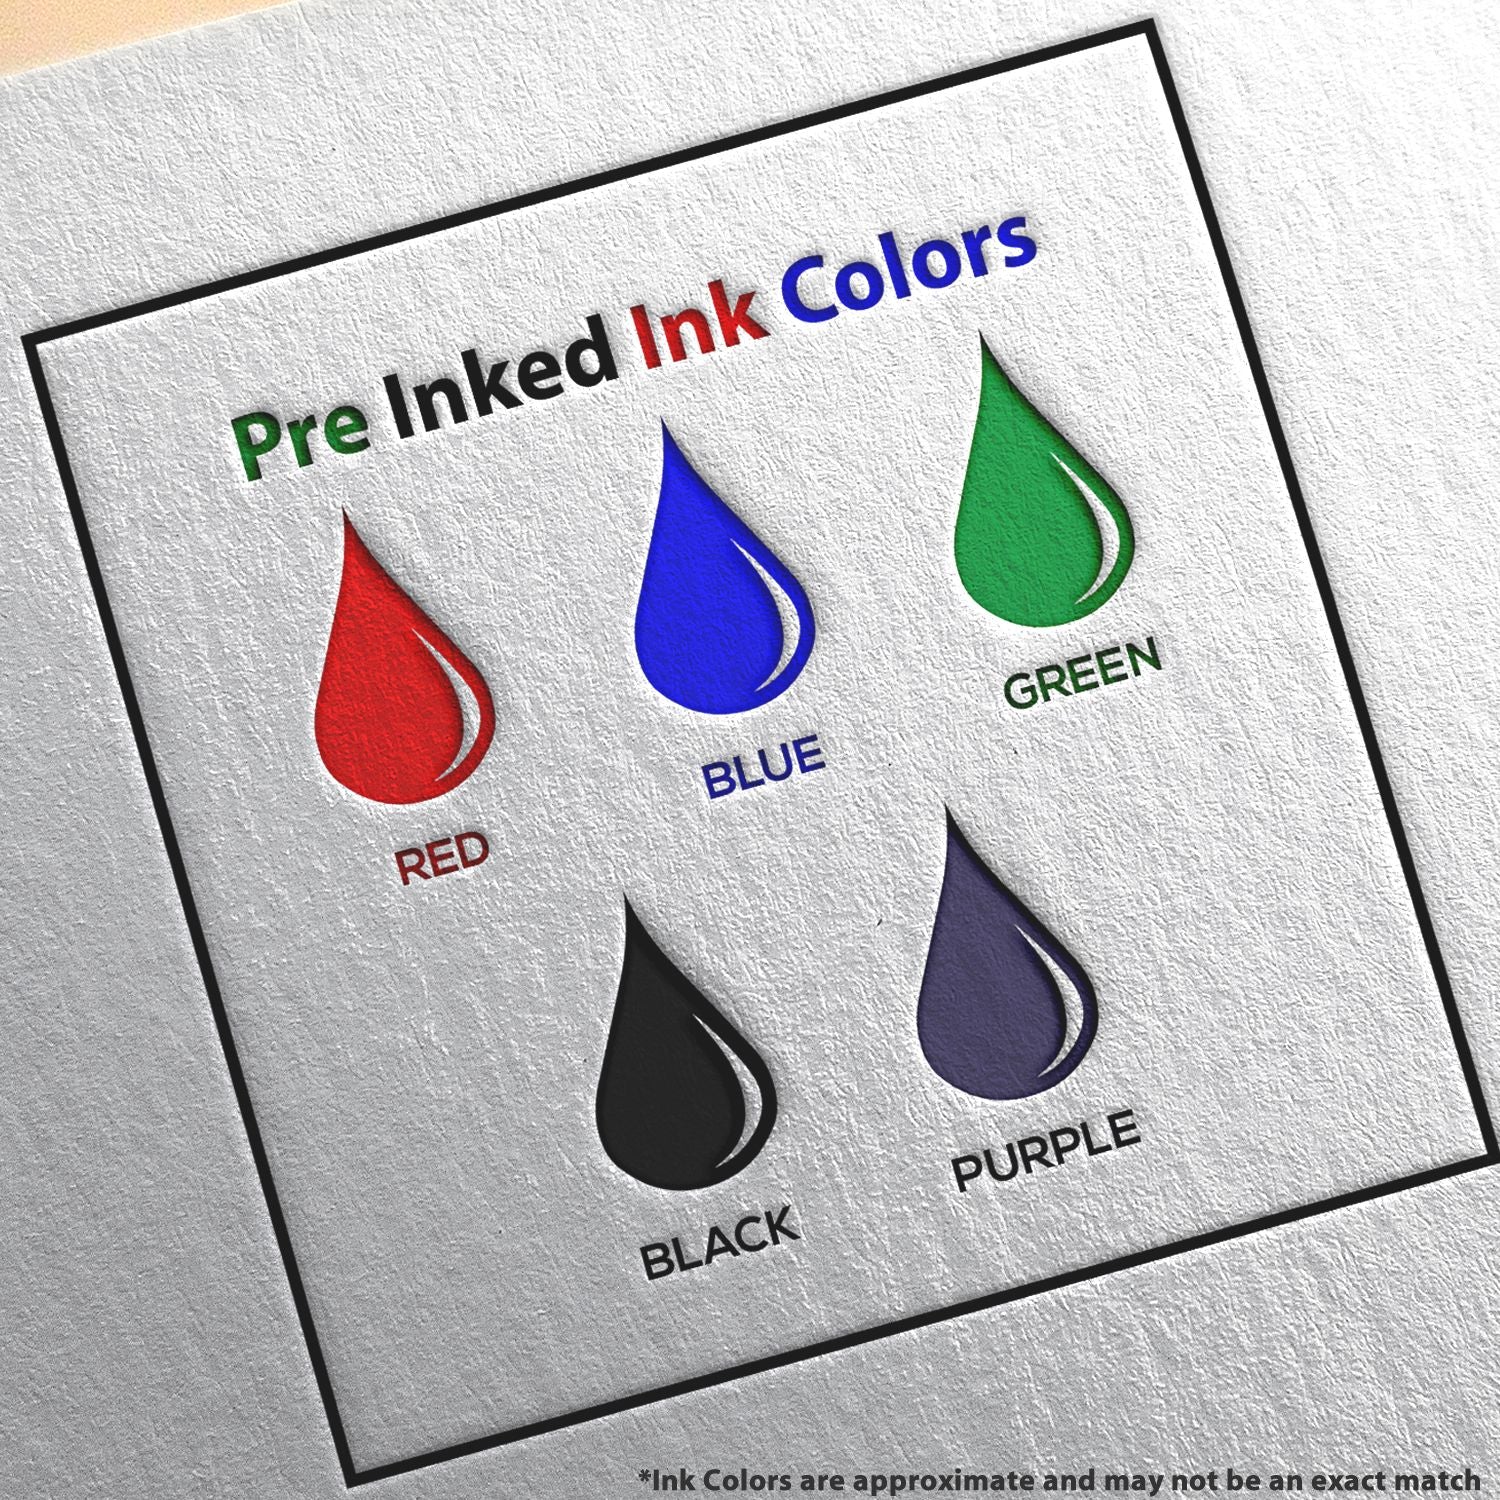 A picture showing the different ink colors or hues available for the Premium MaxLight Pre-Inked Florida Landscape Architectural Stamp product.